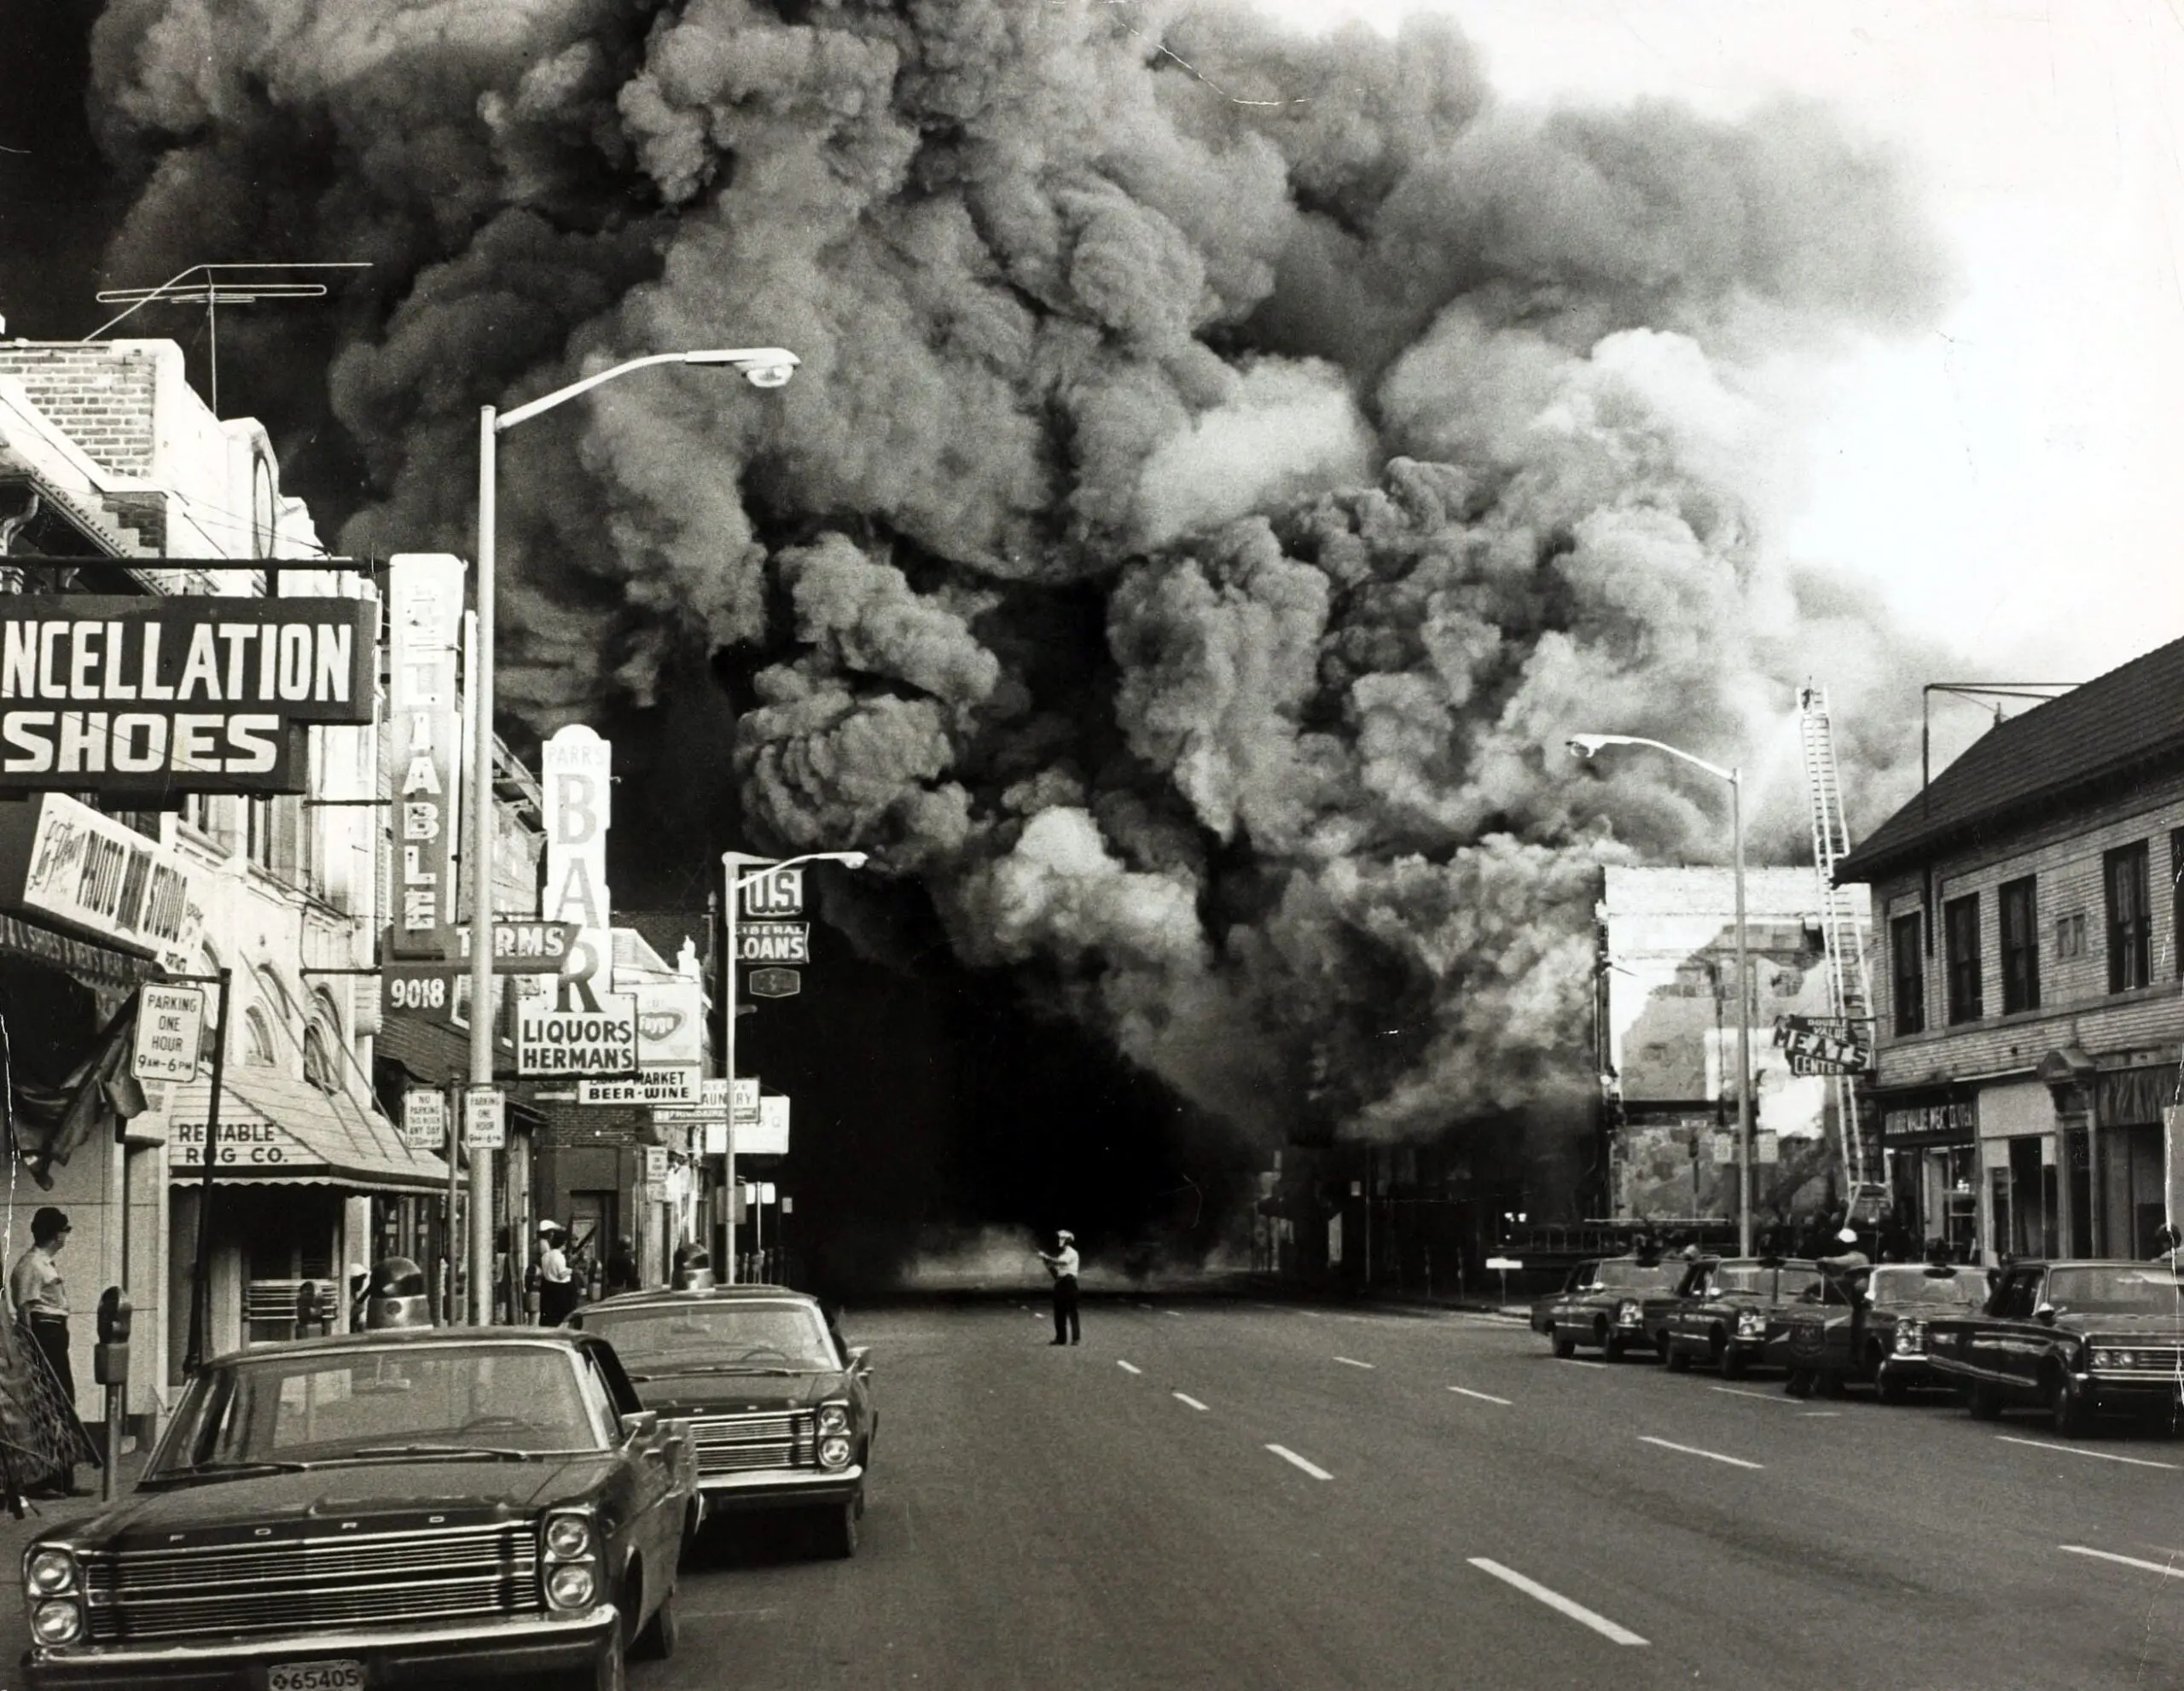 A pall of smoke pours from a burning building during race riots in the Detroit in 1967.